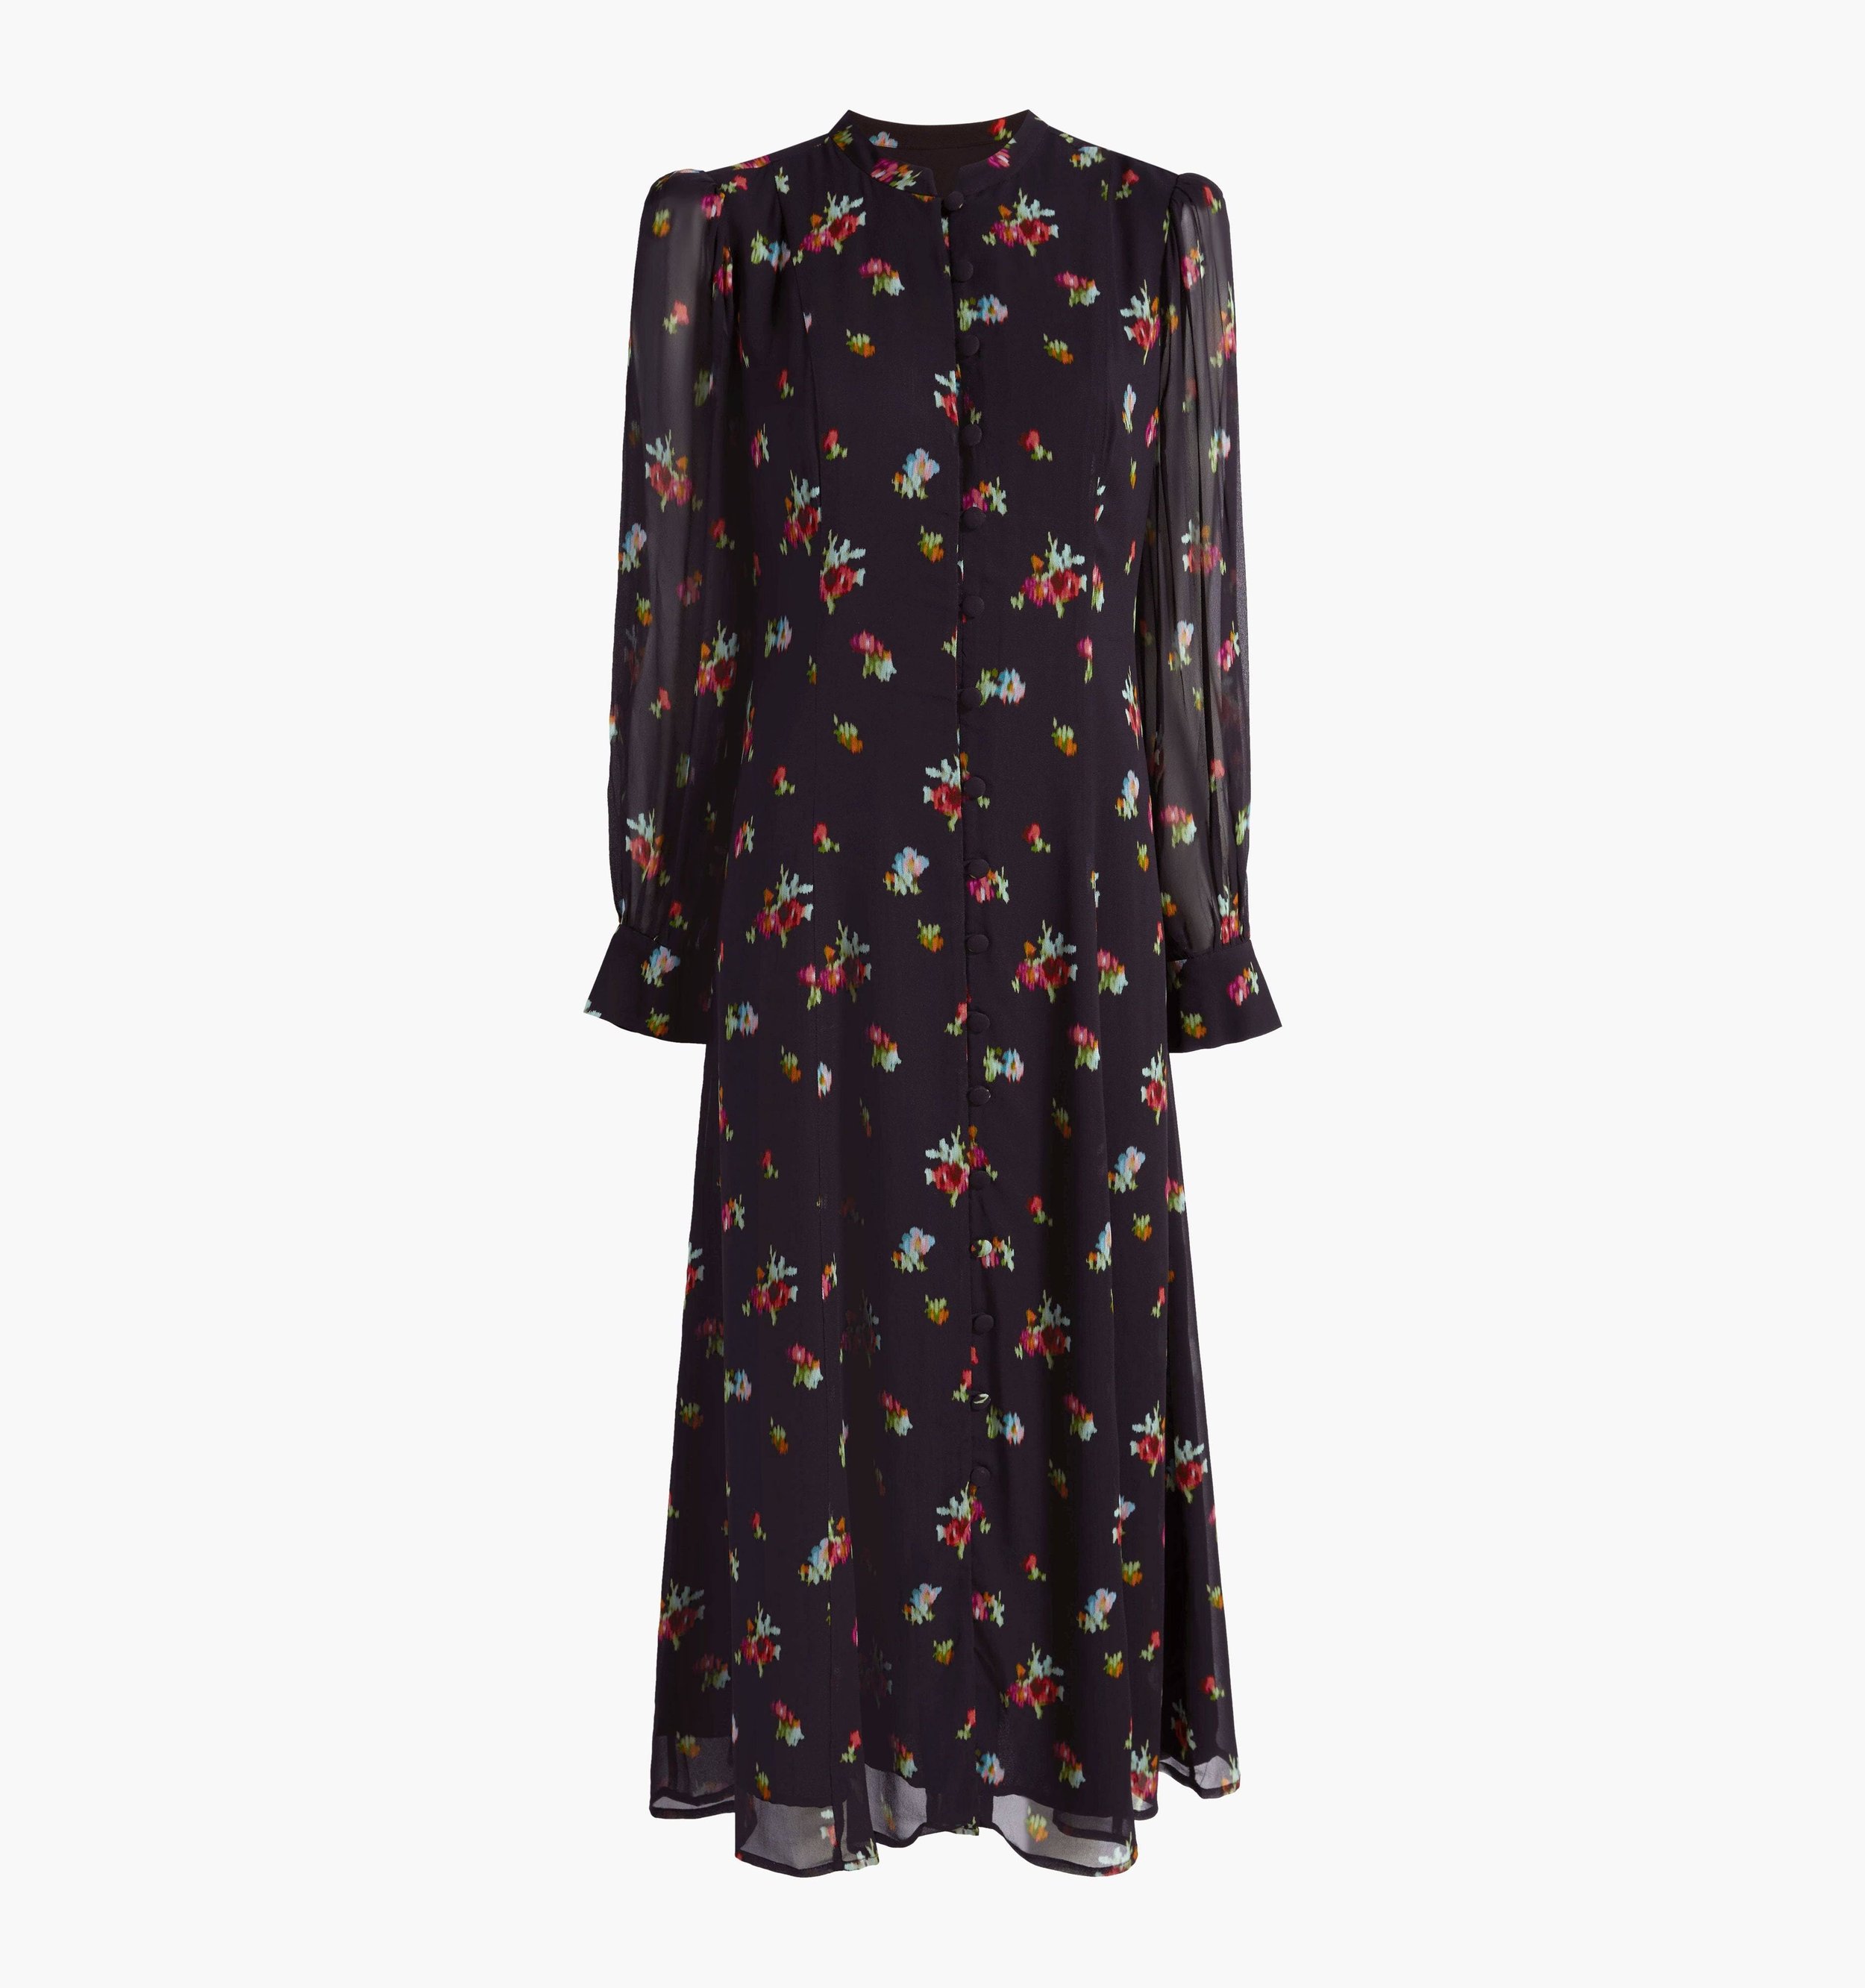 Hill House The Cindra Dress in Black Ikat Floral Georgette.jpg